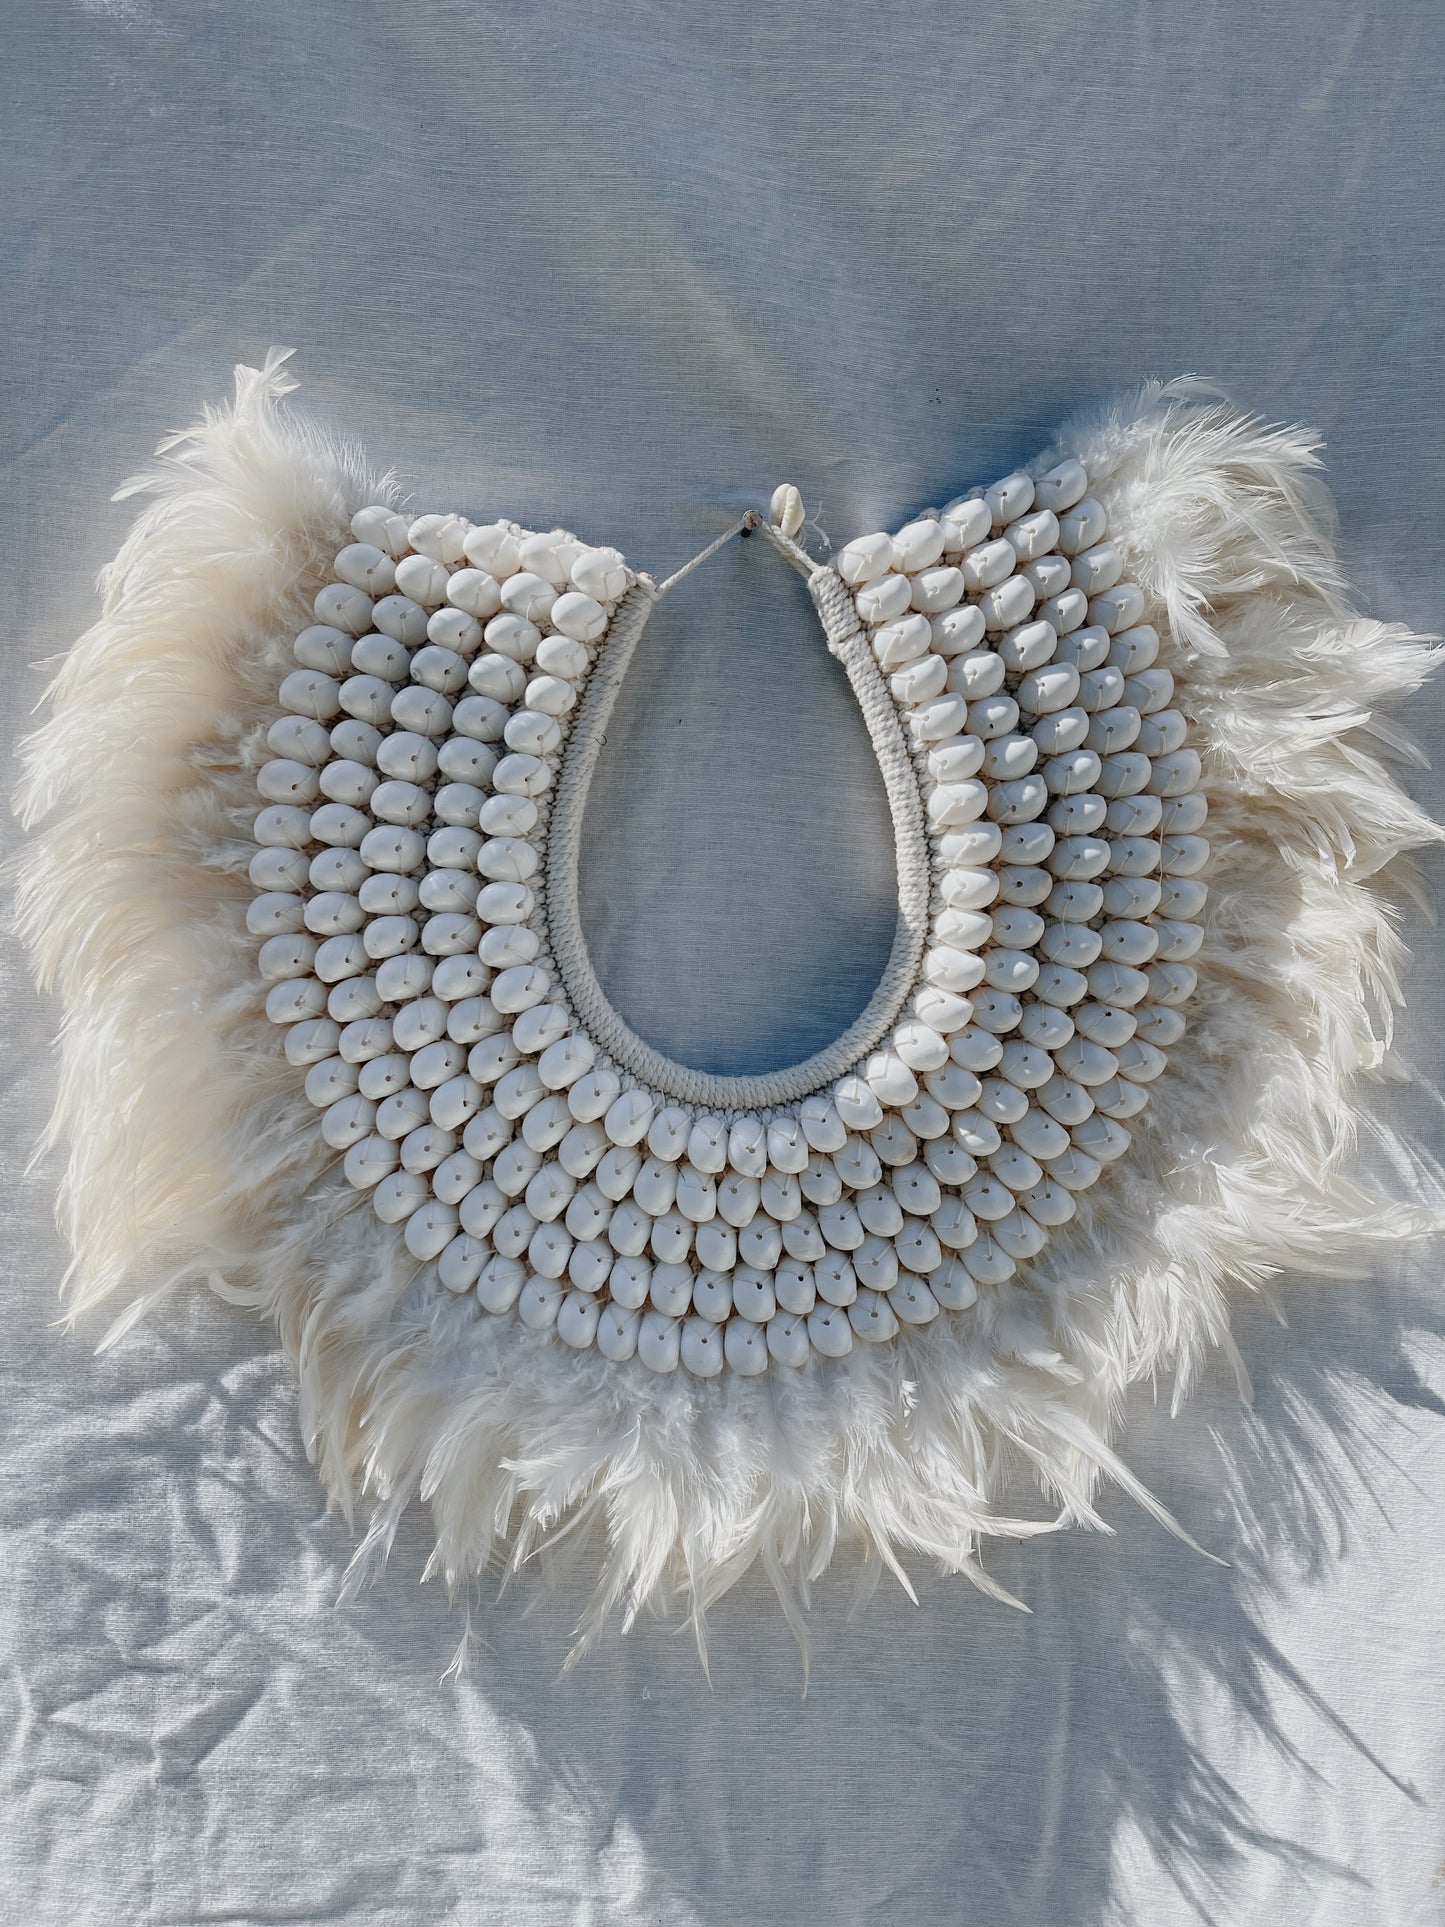 Shell, feather and macrame hand made tribal neckpiece made for display on a wall or side board, mixture of white and natural